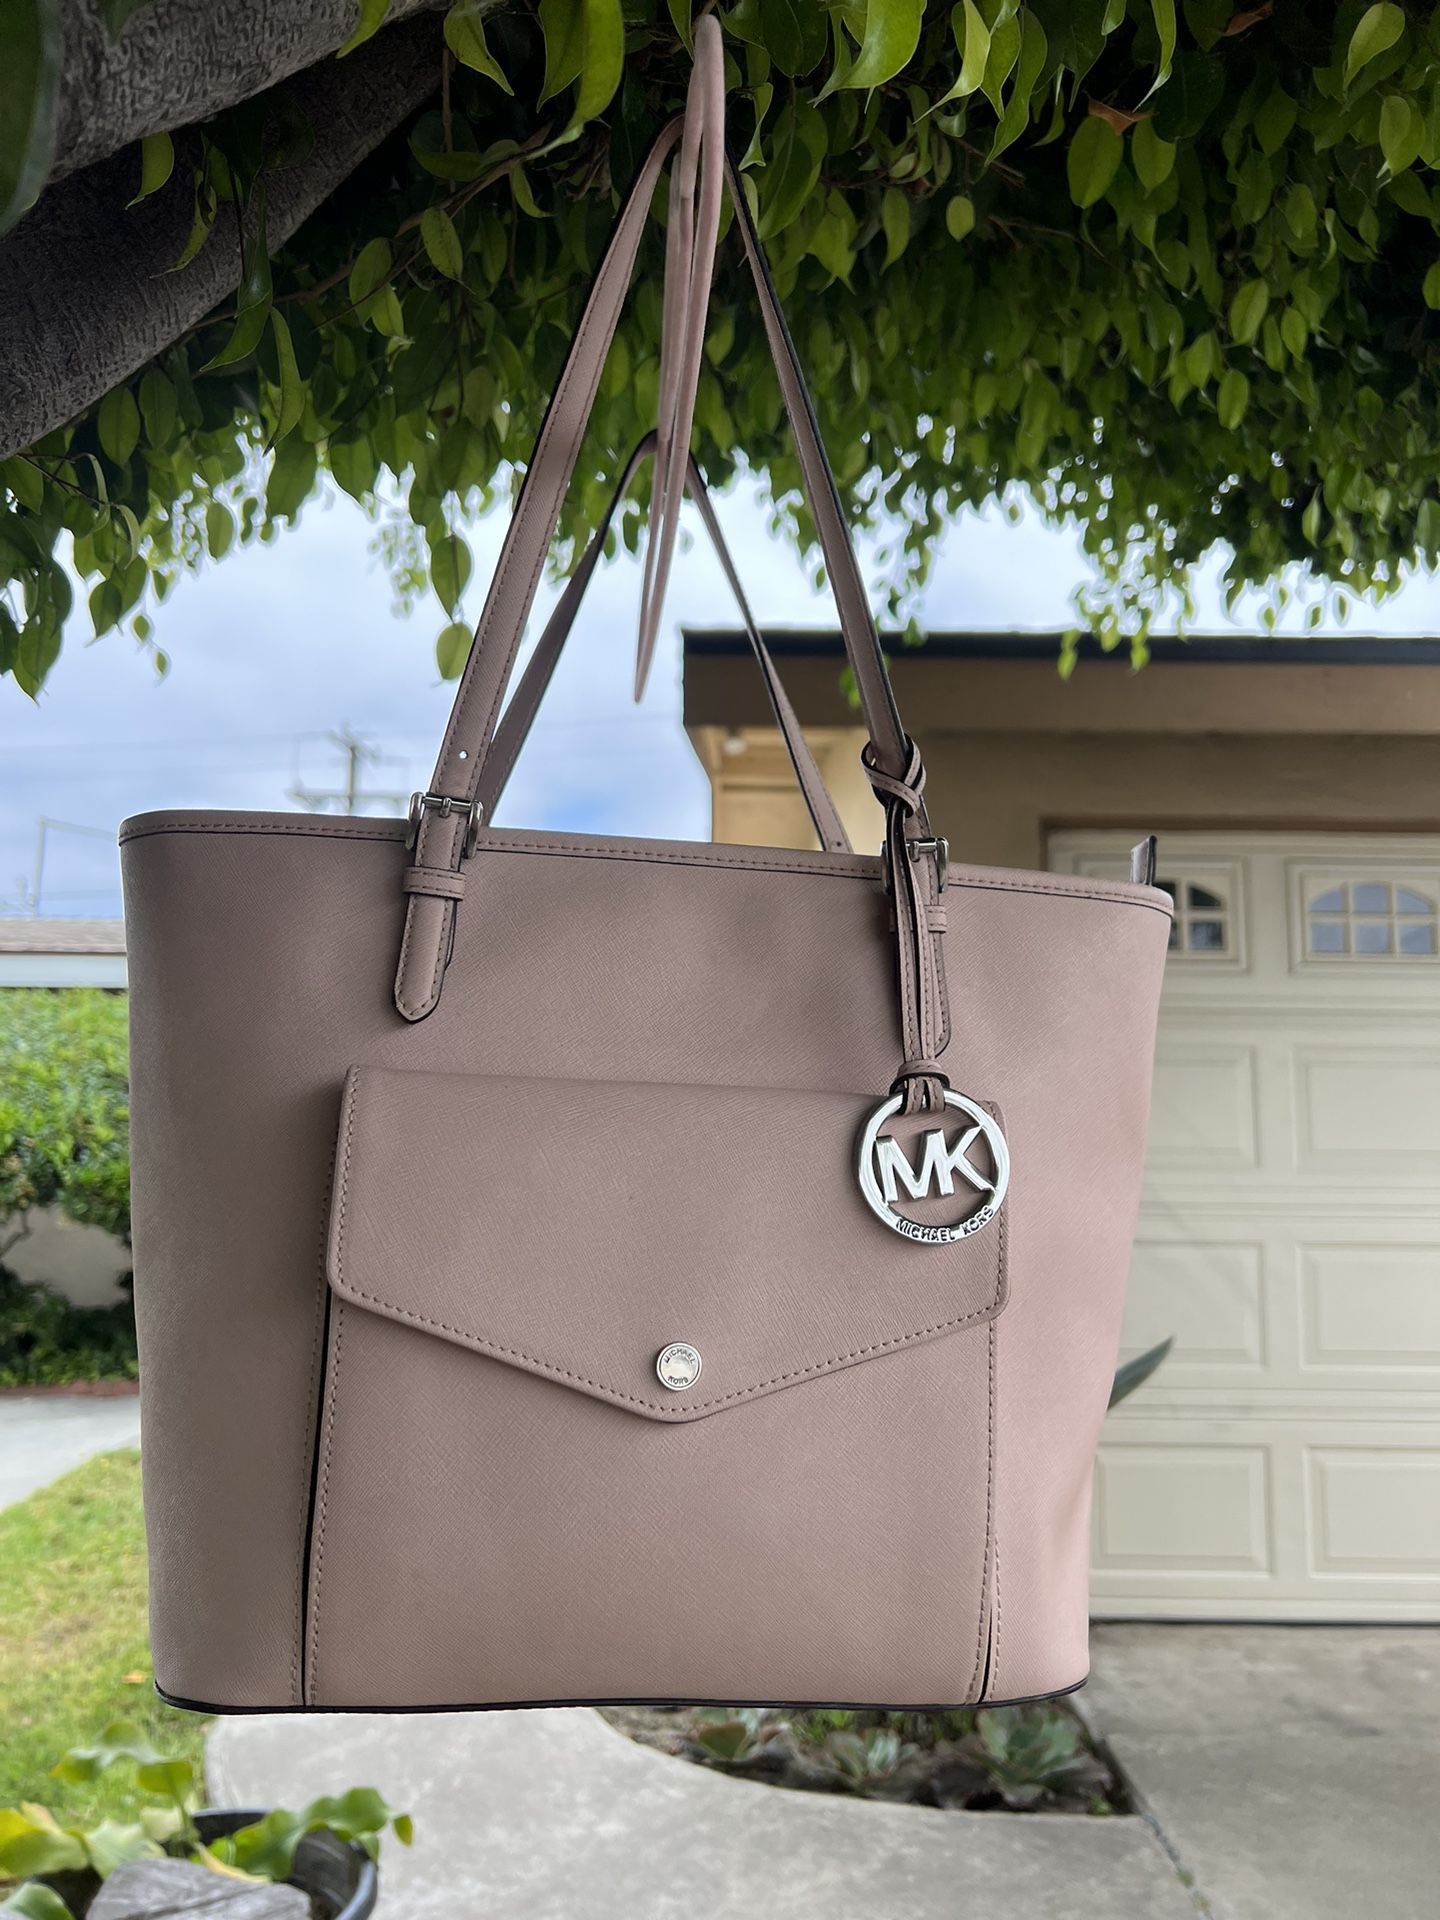 Pink Michael Kors Purse for Sale in Santa Ana, CA - OfferUp